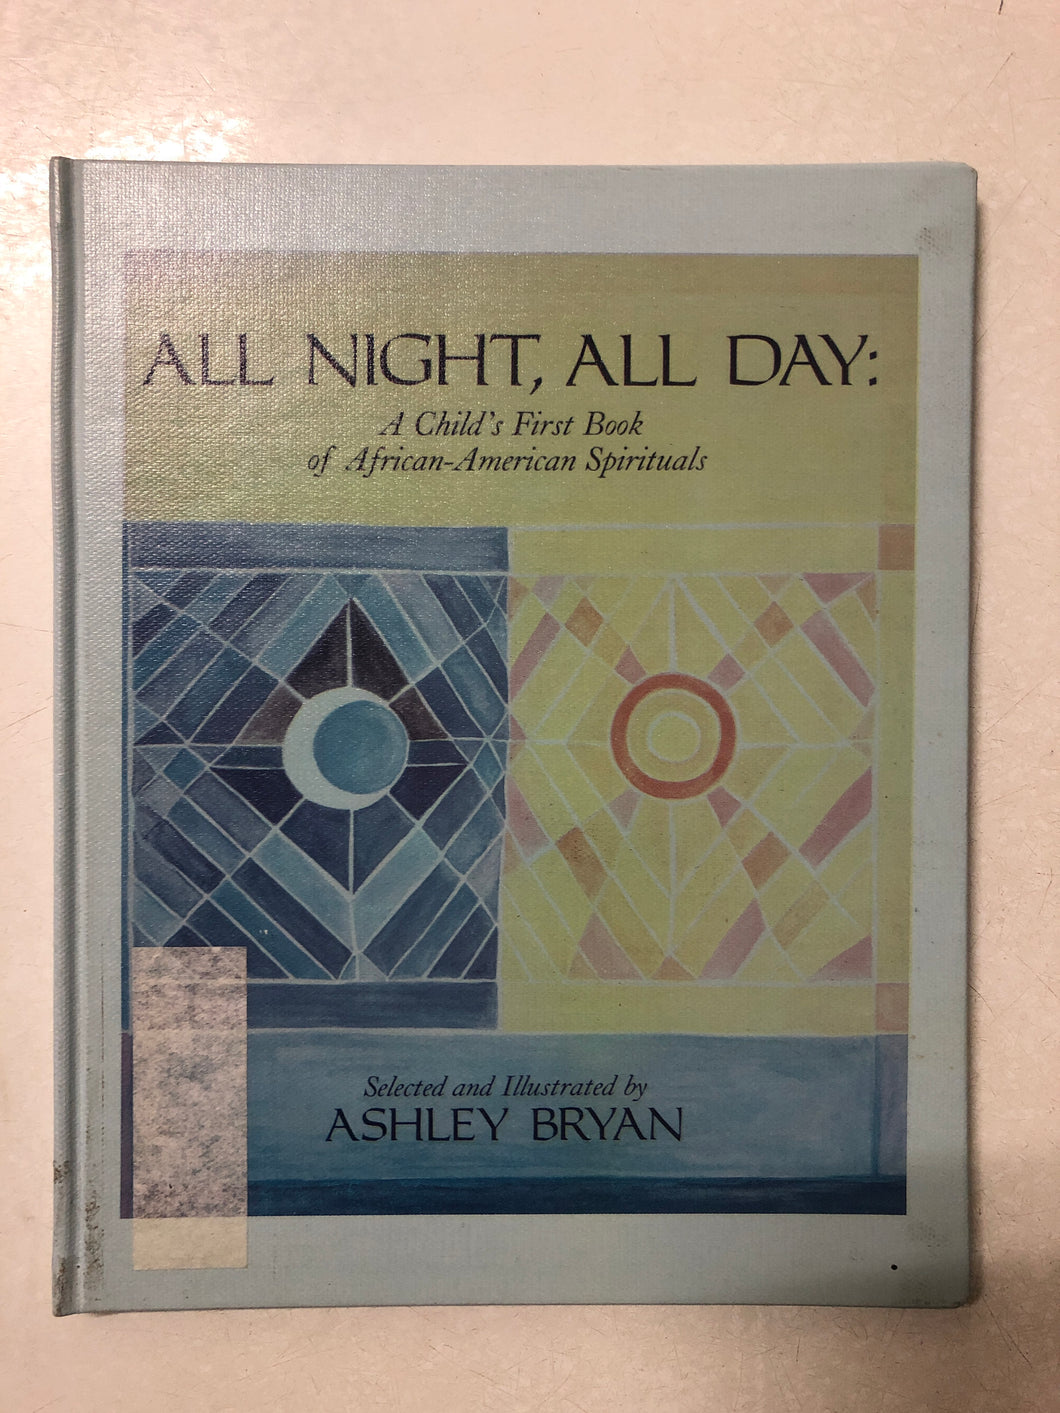 All Night, All Day: A Child’s First Book of African-American Spirituals - Slick Cat Books 